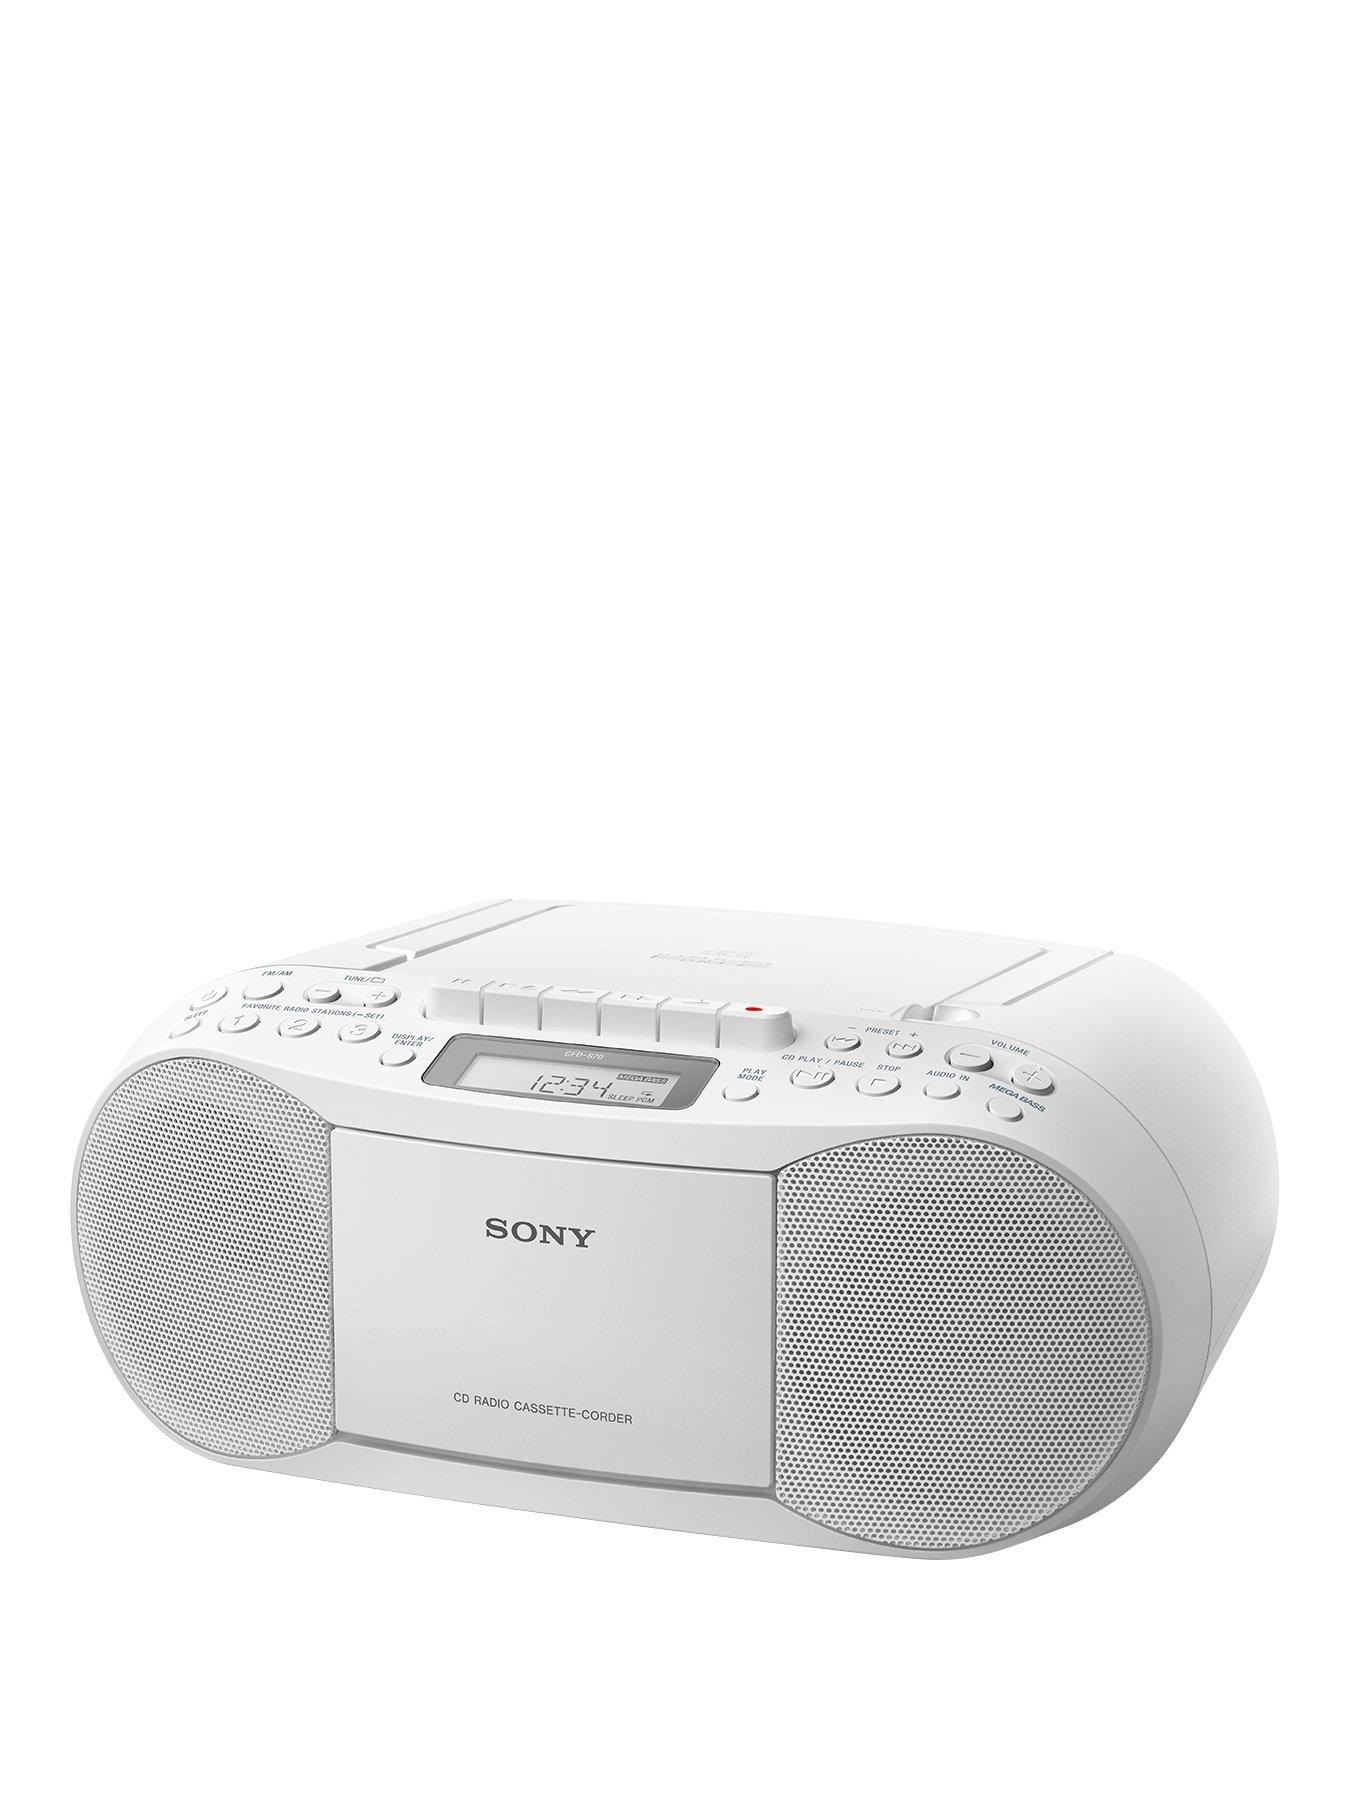 Sony CFD-S70 CD Cassette Boombox with Radio - White 